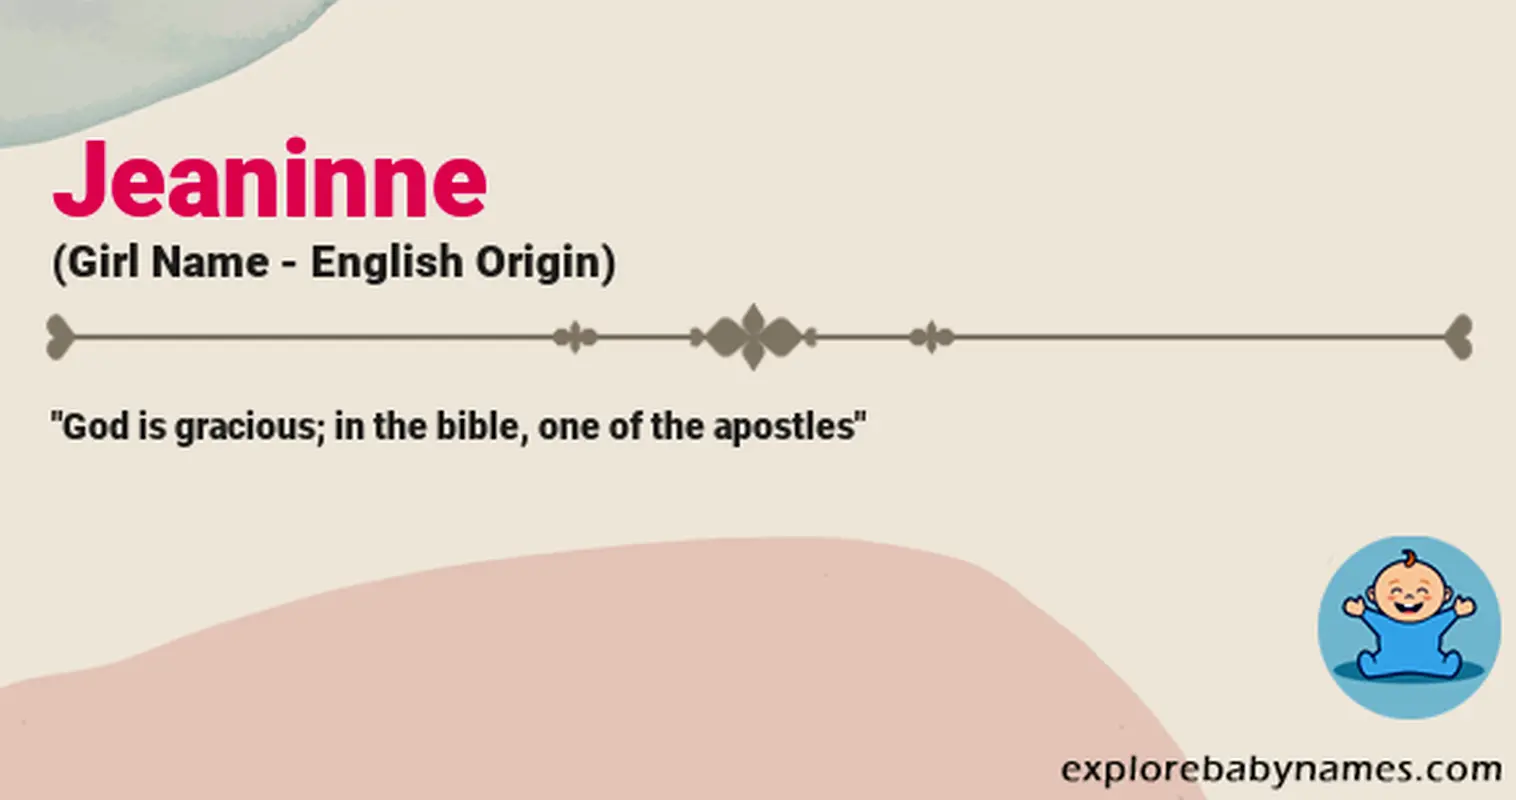 Meaning of Jeaninne